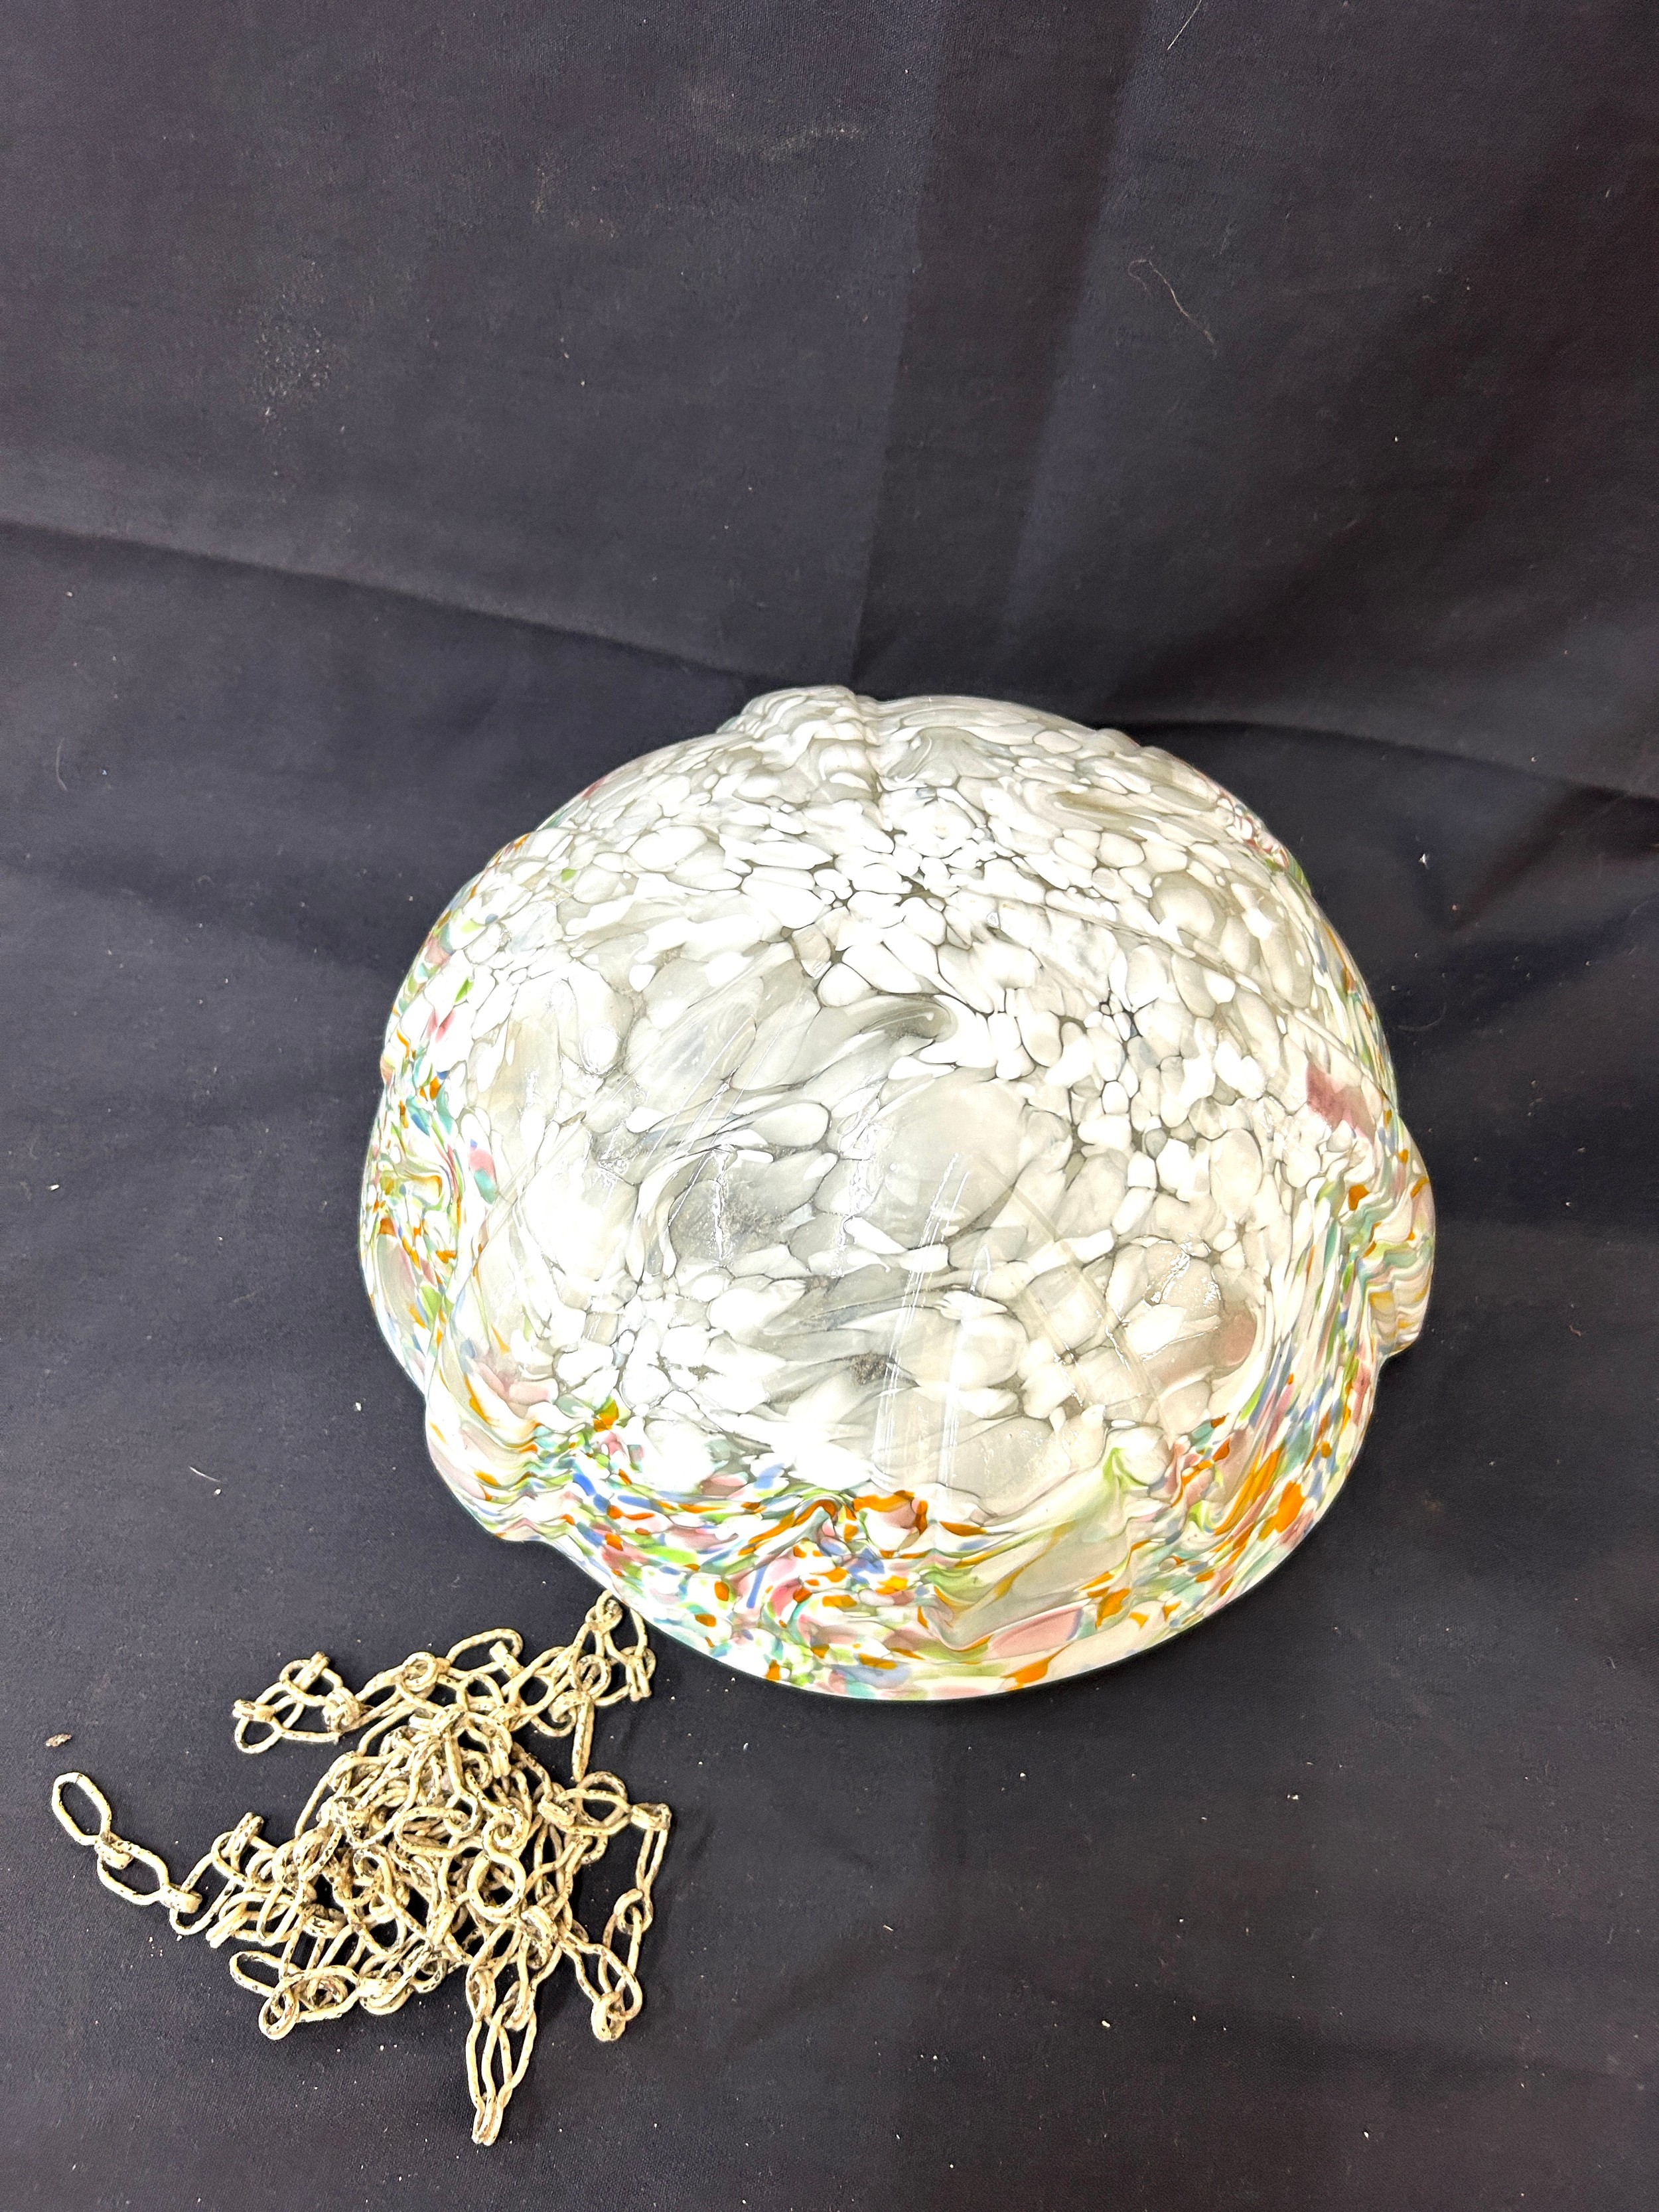 Antique glass light shade, measures approximately 6 inches tall 13 inches diameter - Image 3 of 3